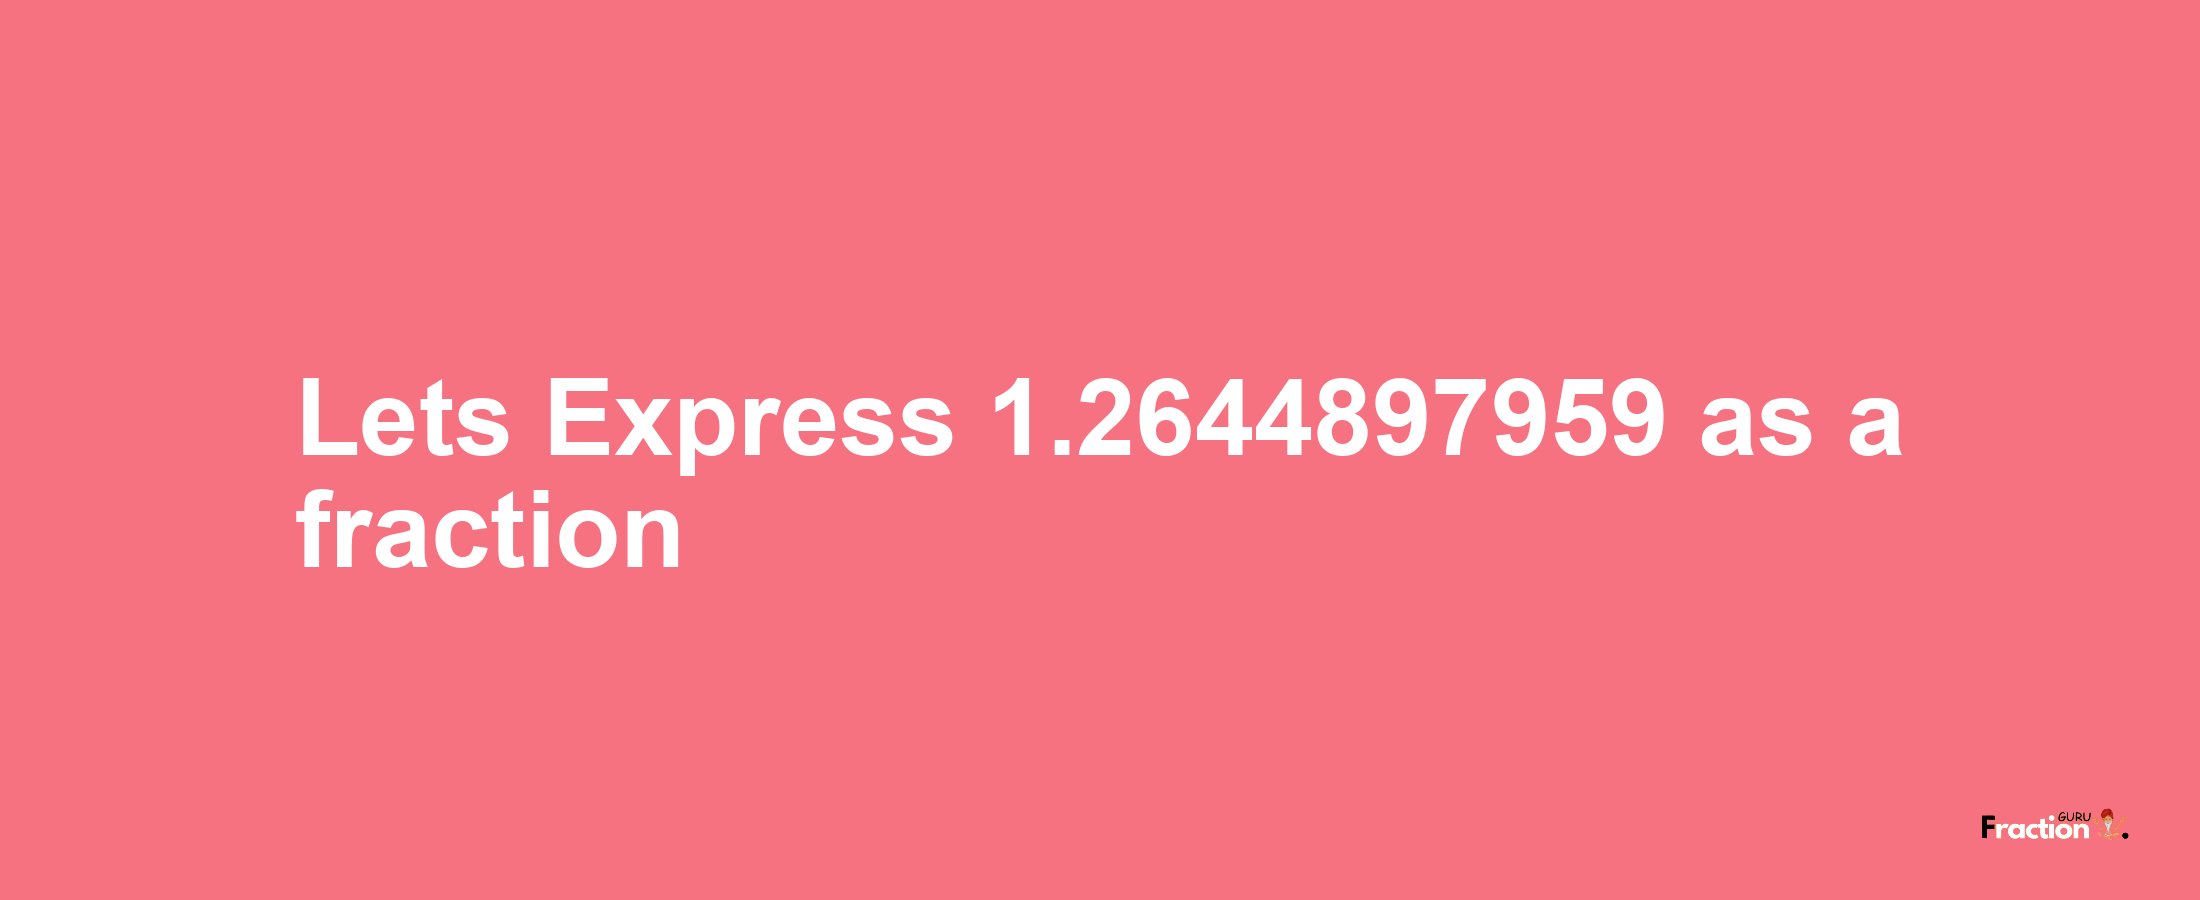 Lets Express 1.2644897959 as afraction